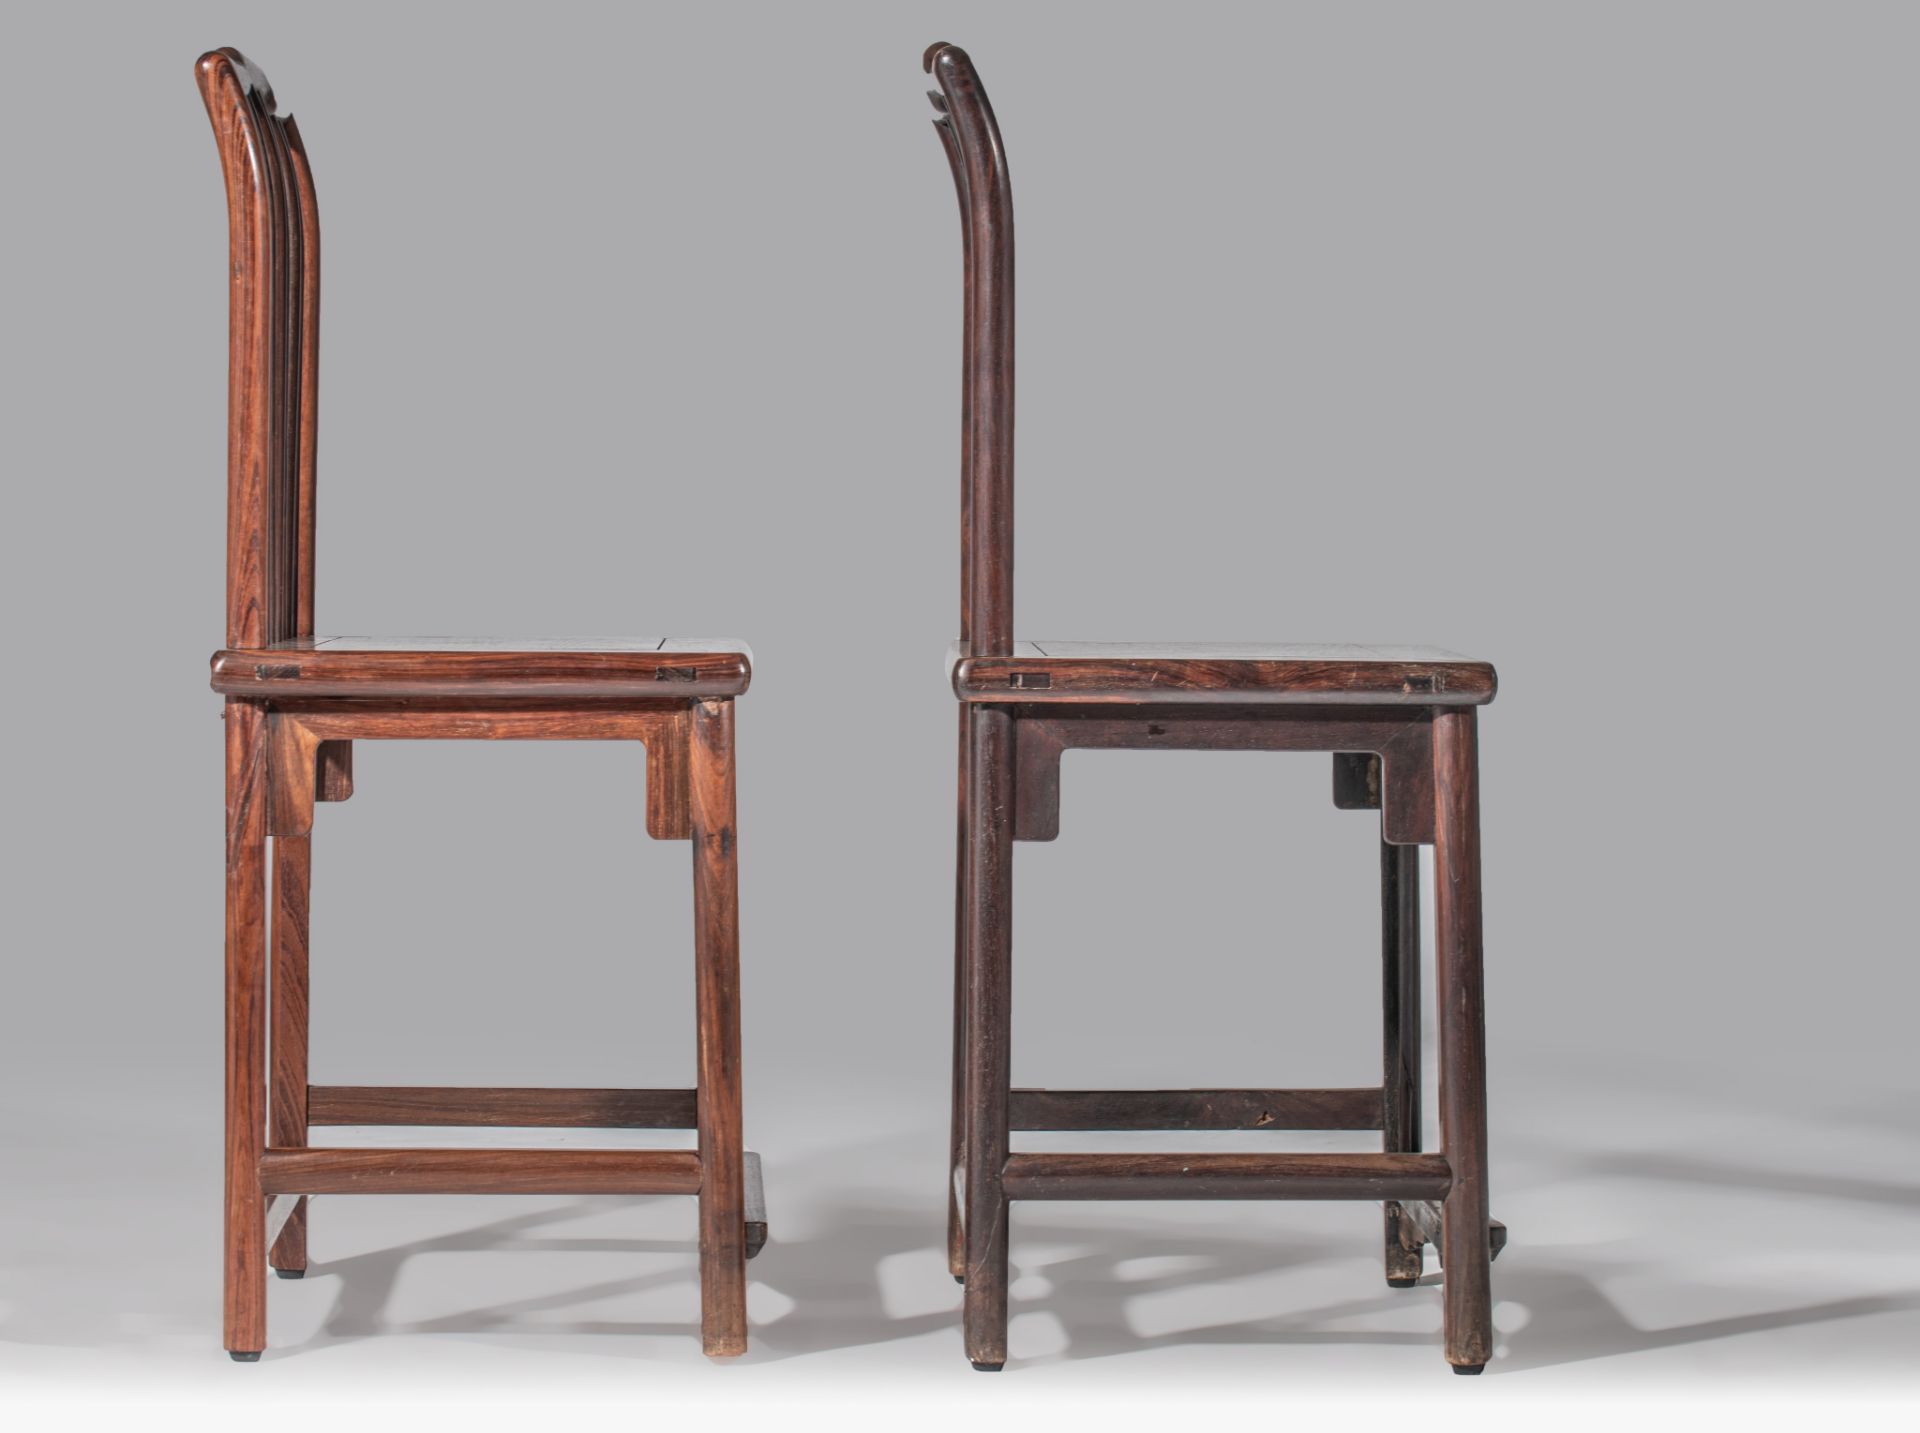 A pair of Chinese hardwood spindle back chairs, Republic period, H 92 - W 52,5 - D 40 cm - Image 6 of 8